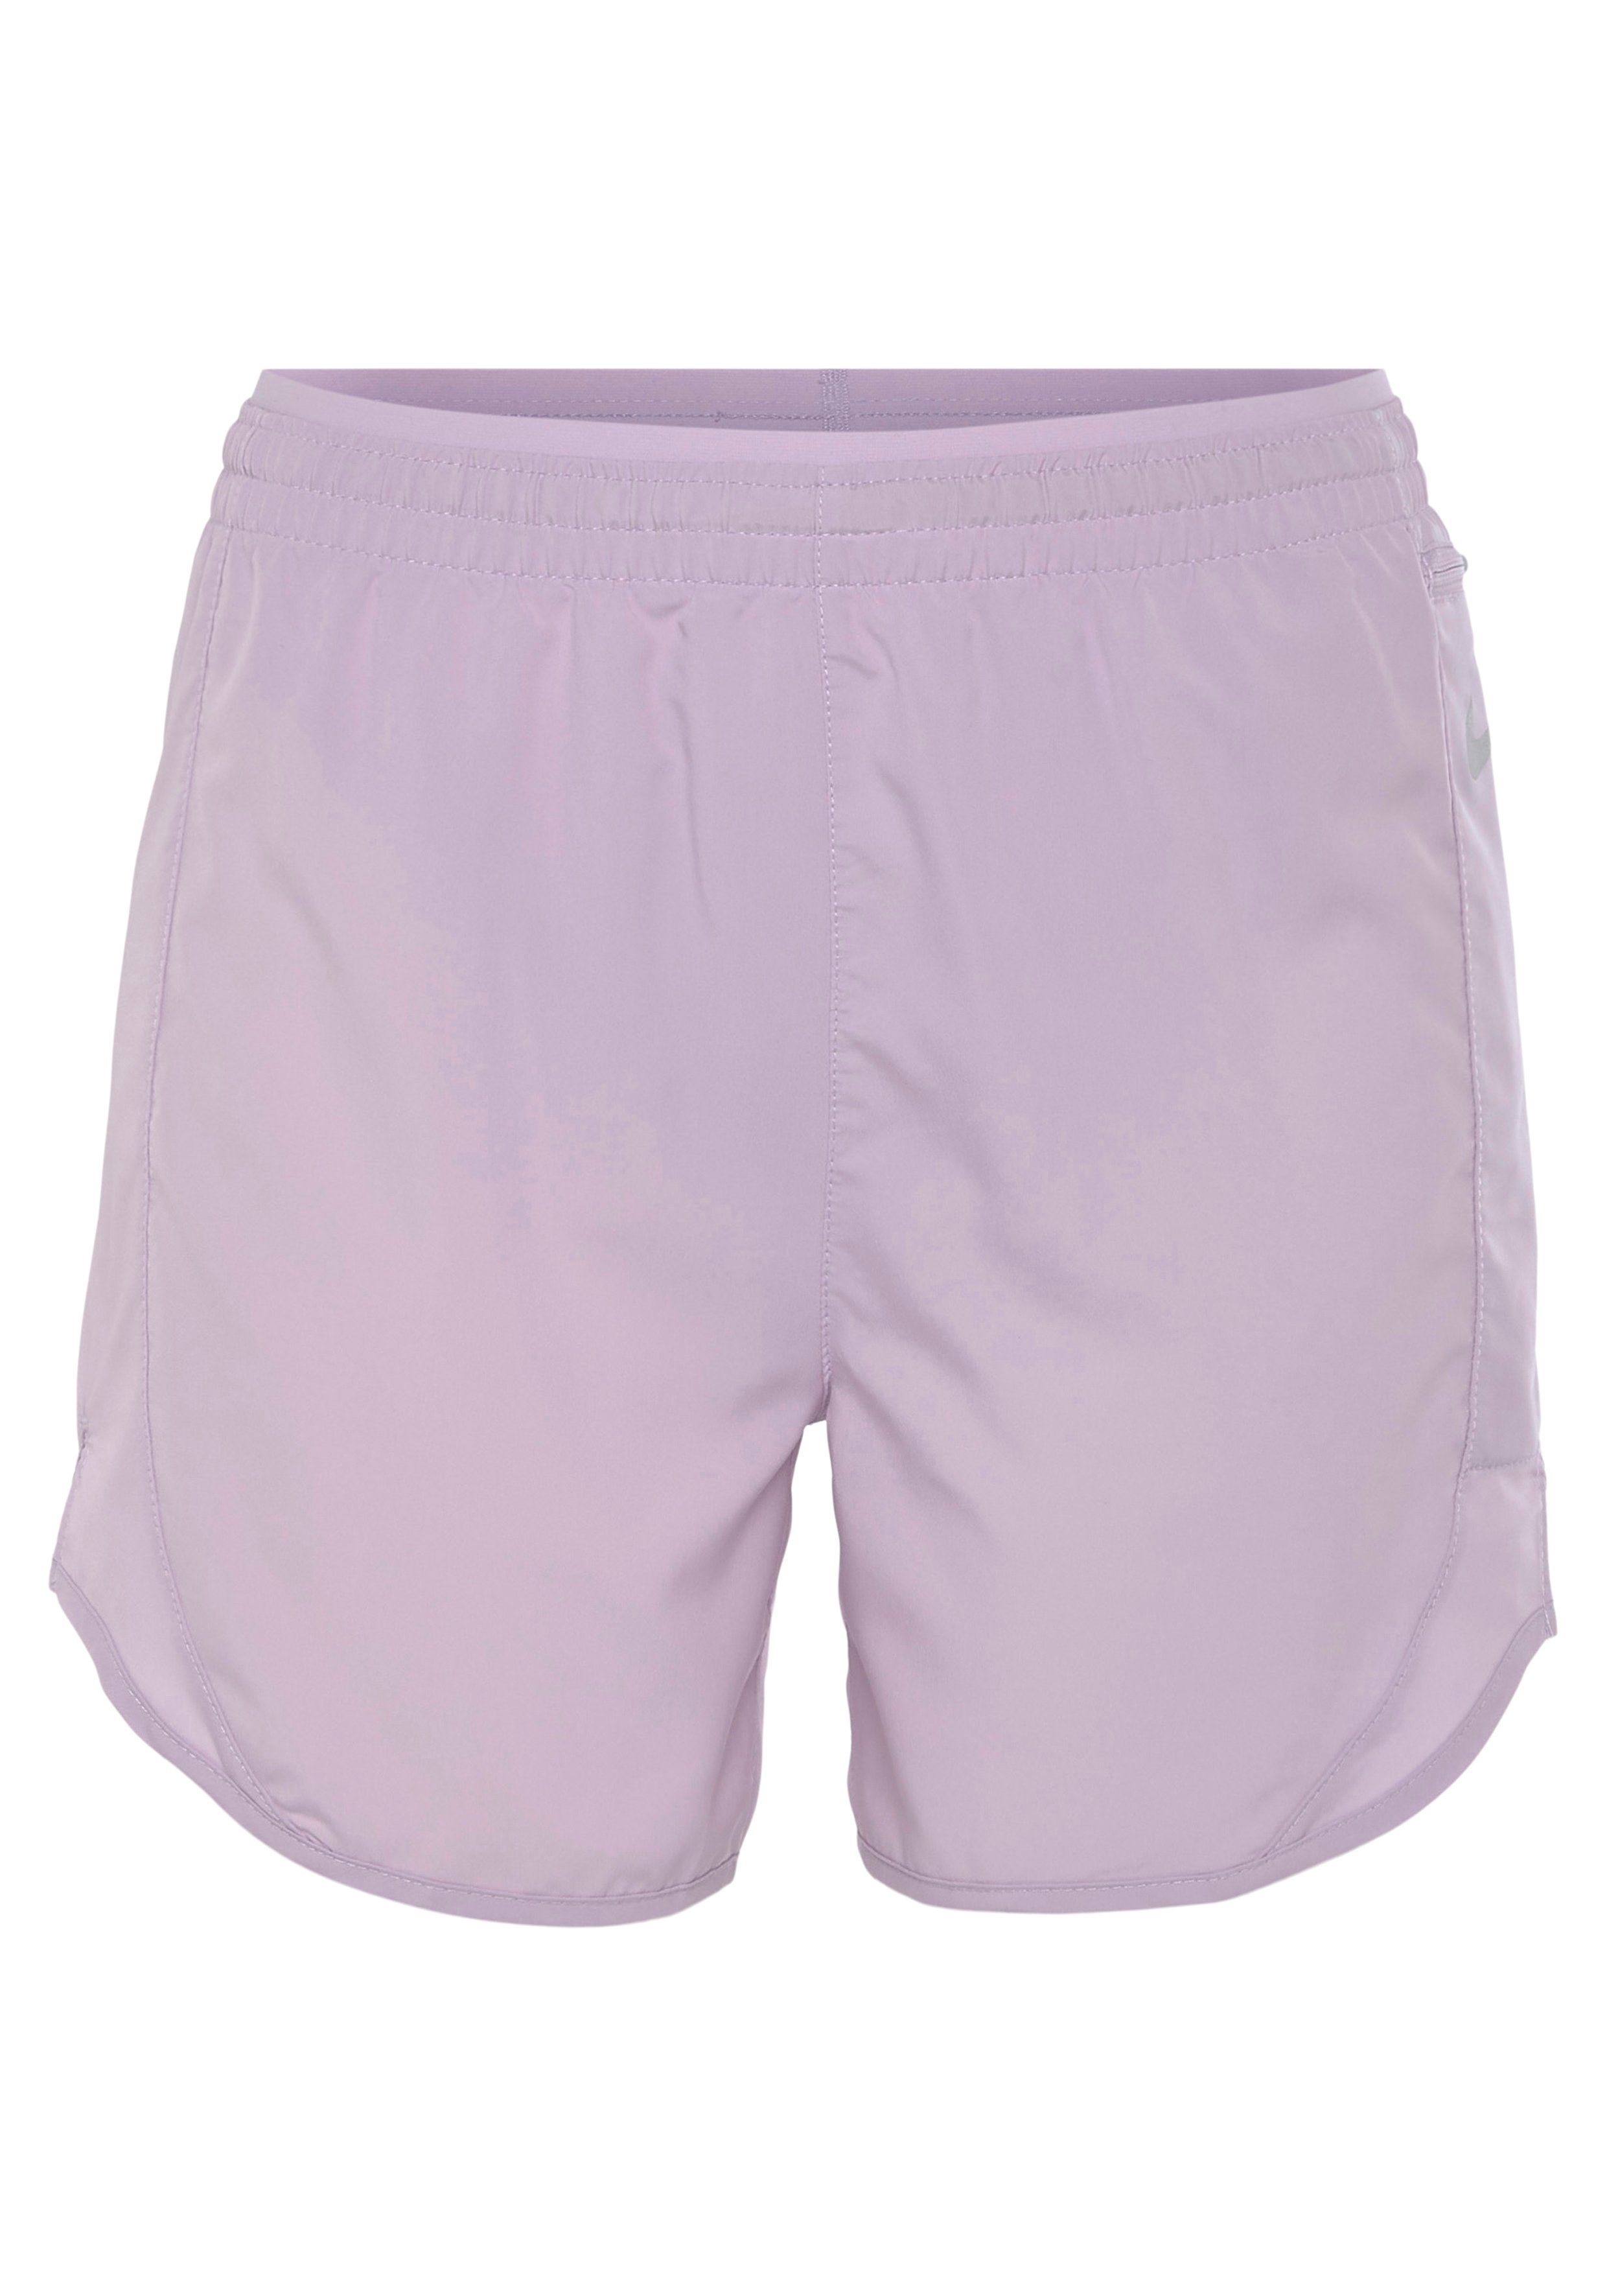 Shorts Women's Luxe Nike Running Laufshorts Tempo DOLL/DOLL/REFLECTIVE SILV